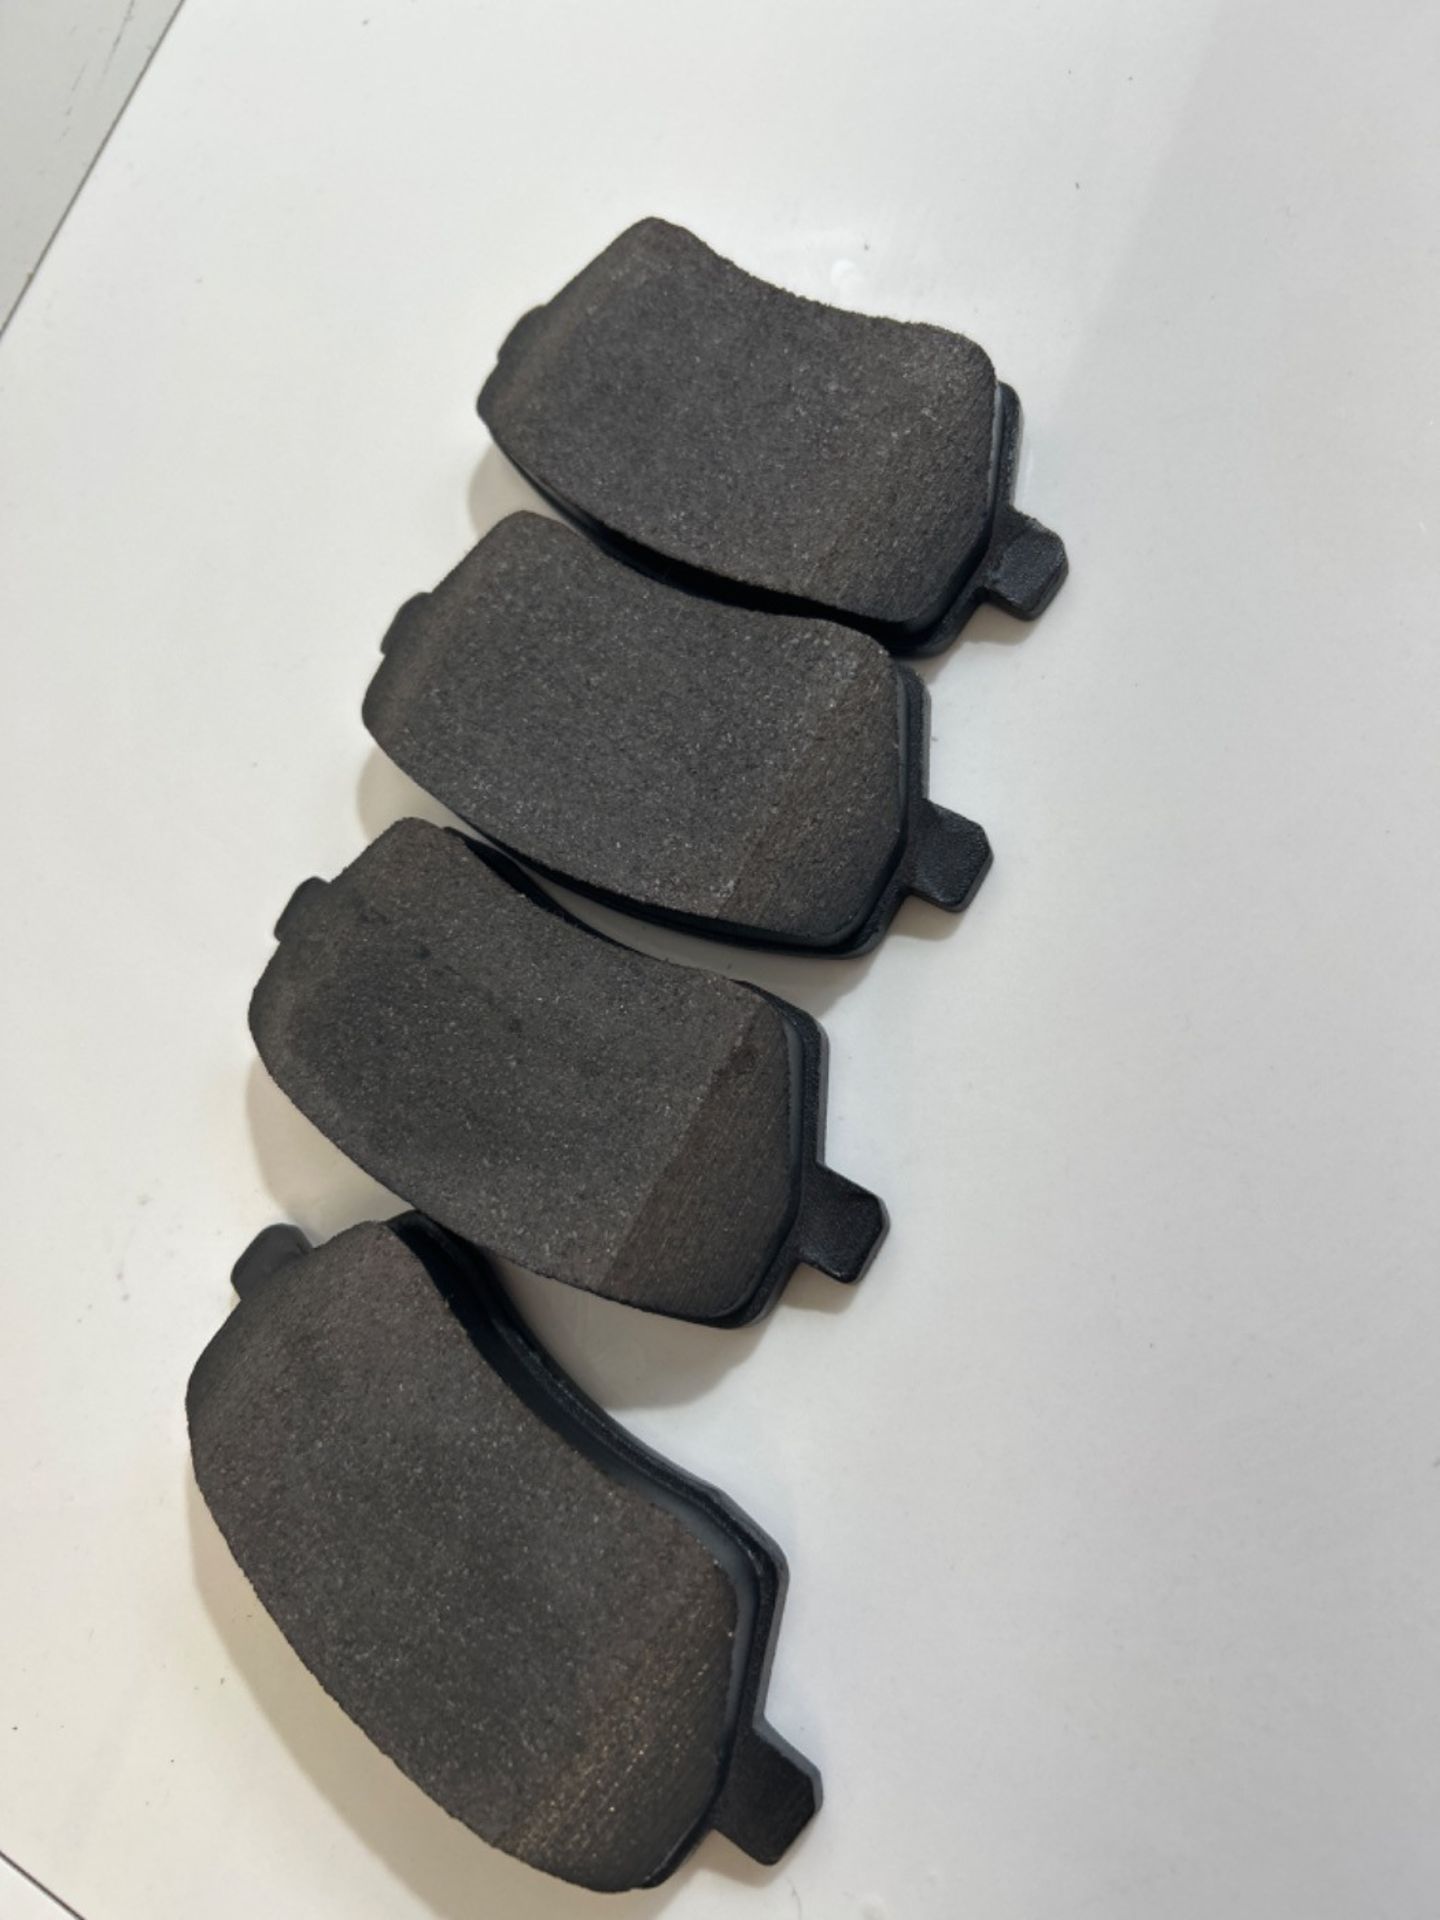 Bosch BP2697 Brake pads - Front axle - ECE-R90 certification - 1 set of 4 pads - Image 3 of 3